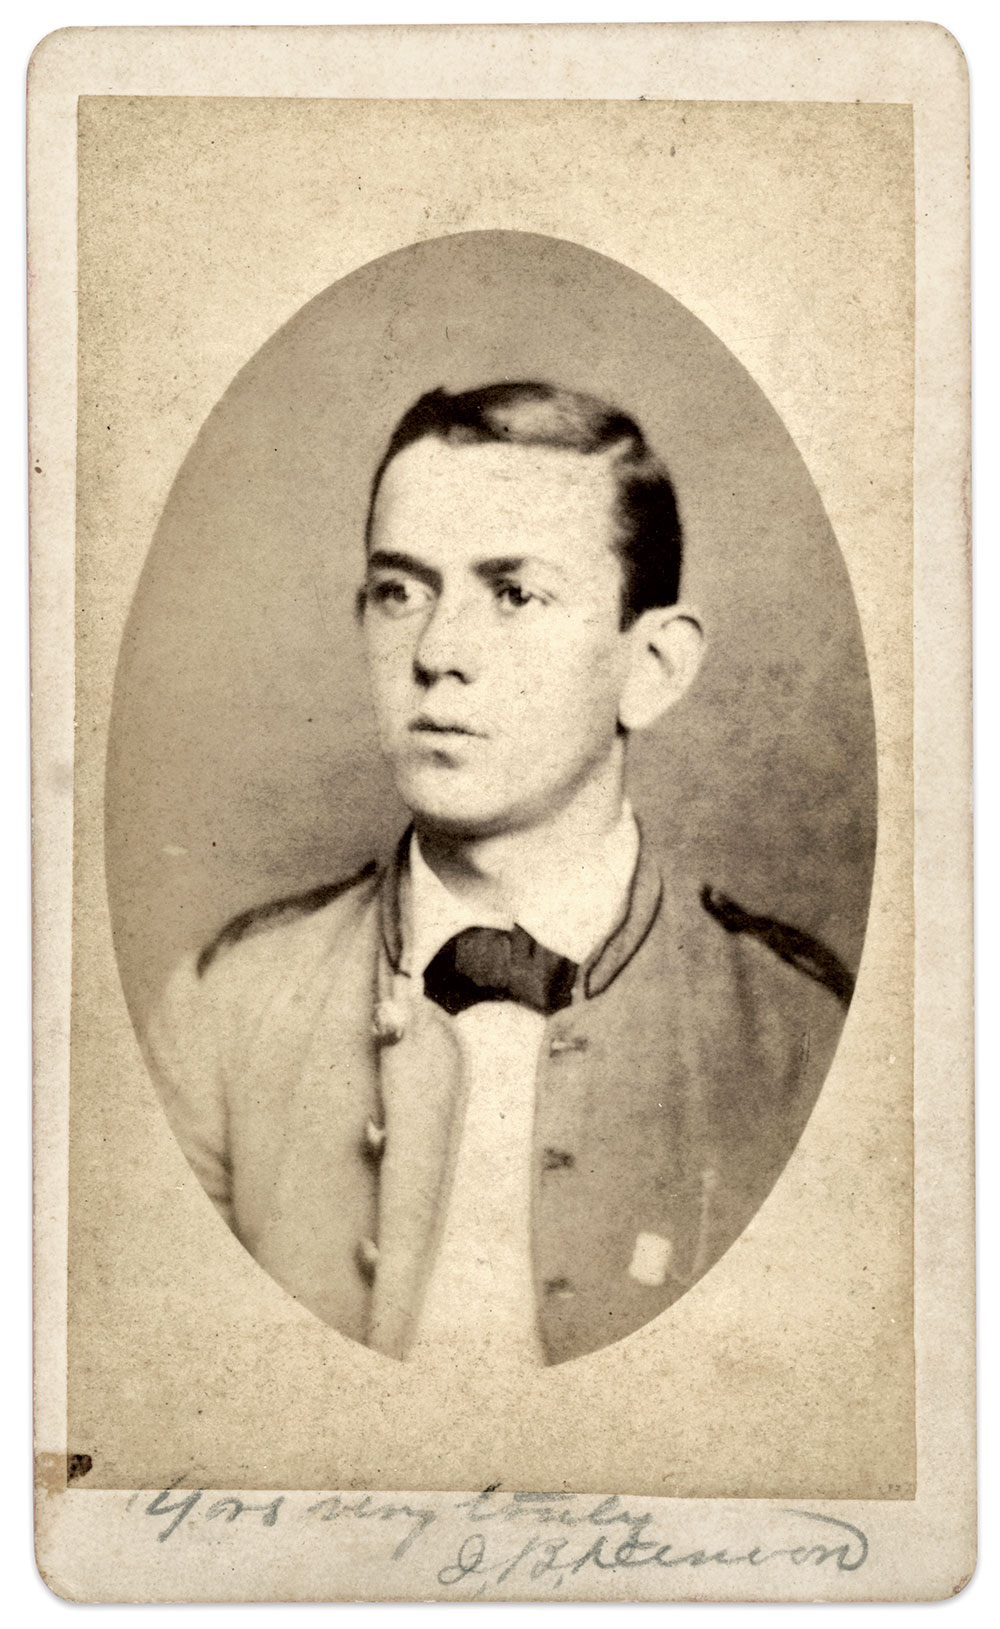 Cadet James Bolling Denoon, Corps of Cadets, in 1876 or 1877. Carte de visite by an unidentifiedphotographer. Author’s collection.